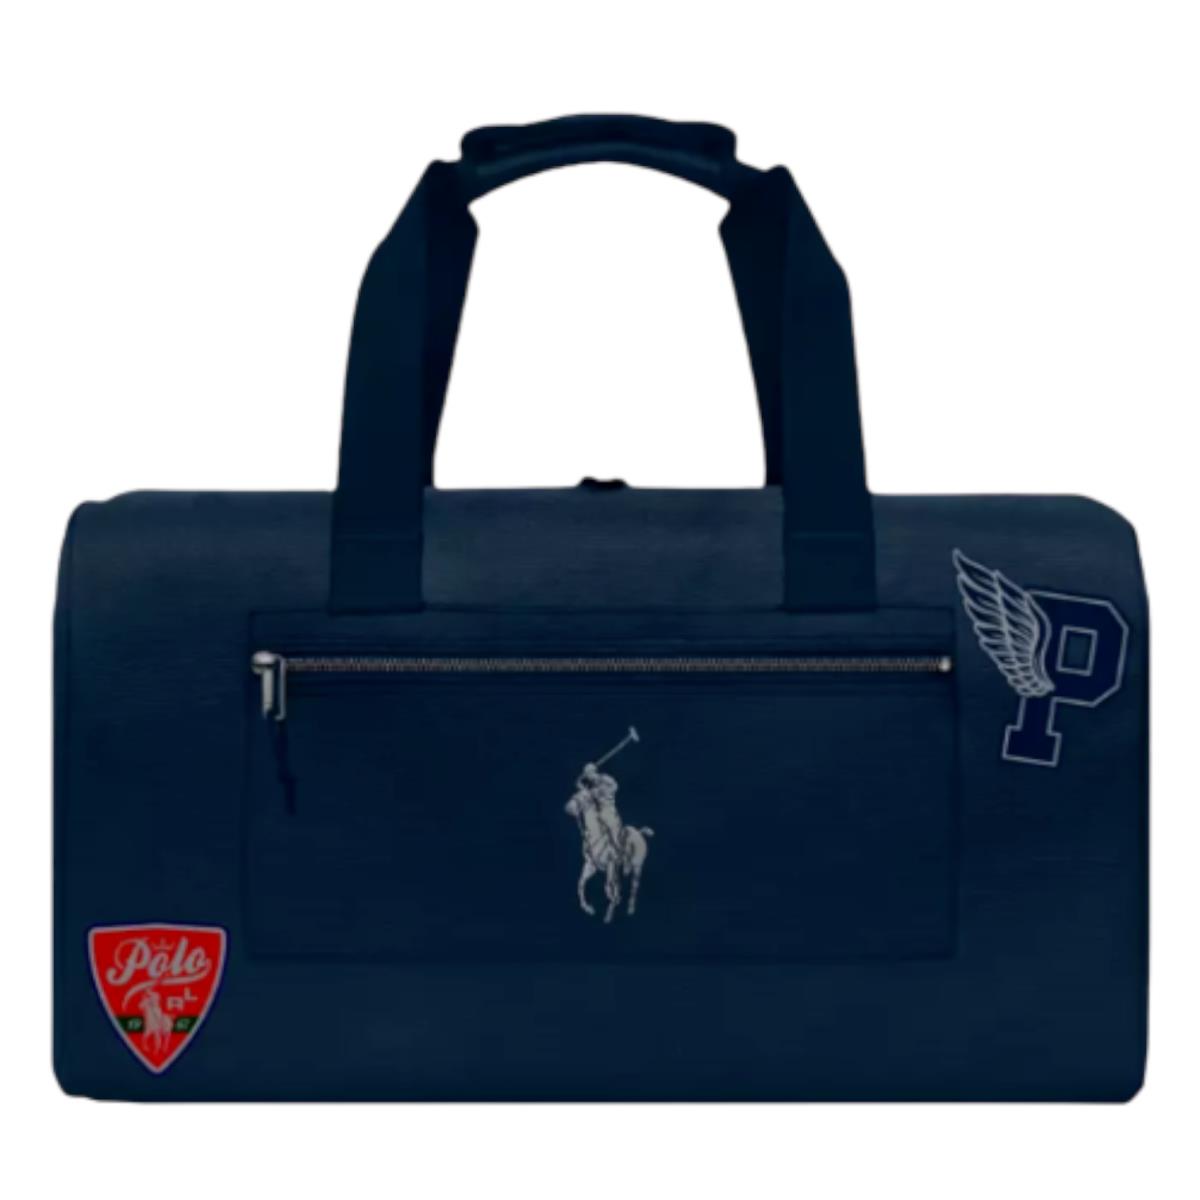 Polo Ralph Lauren Weekender Gym Carry On Duffle Bag 3 Straps Navy